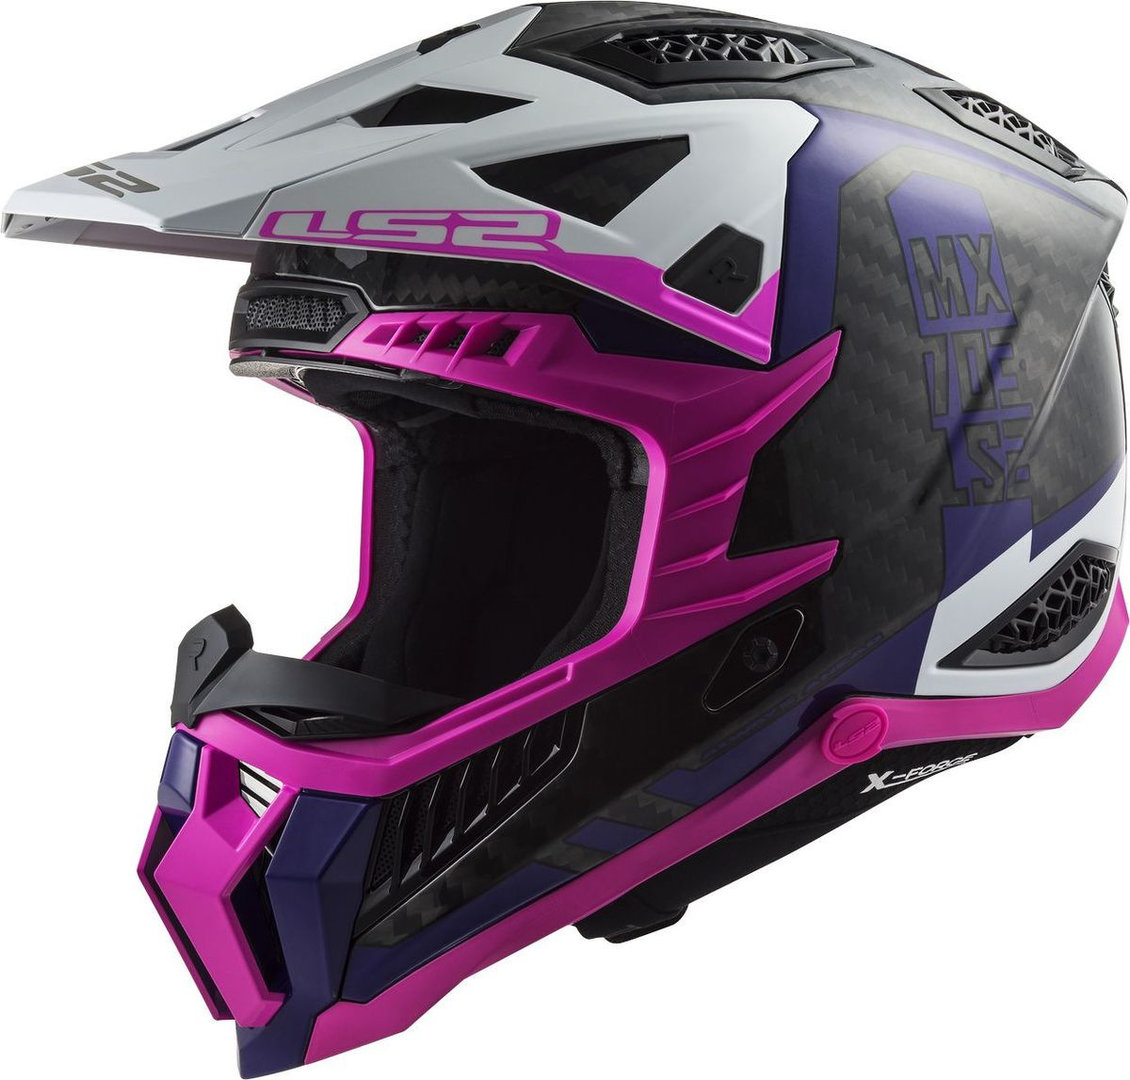 MX 703 X-FORCE CARBON VICTORY 